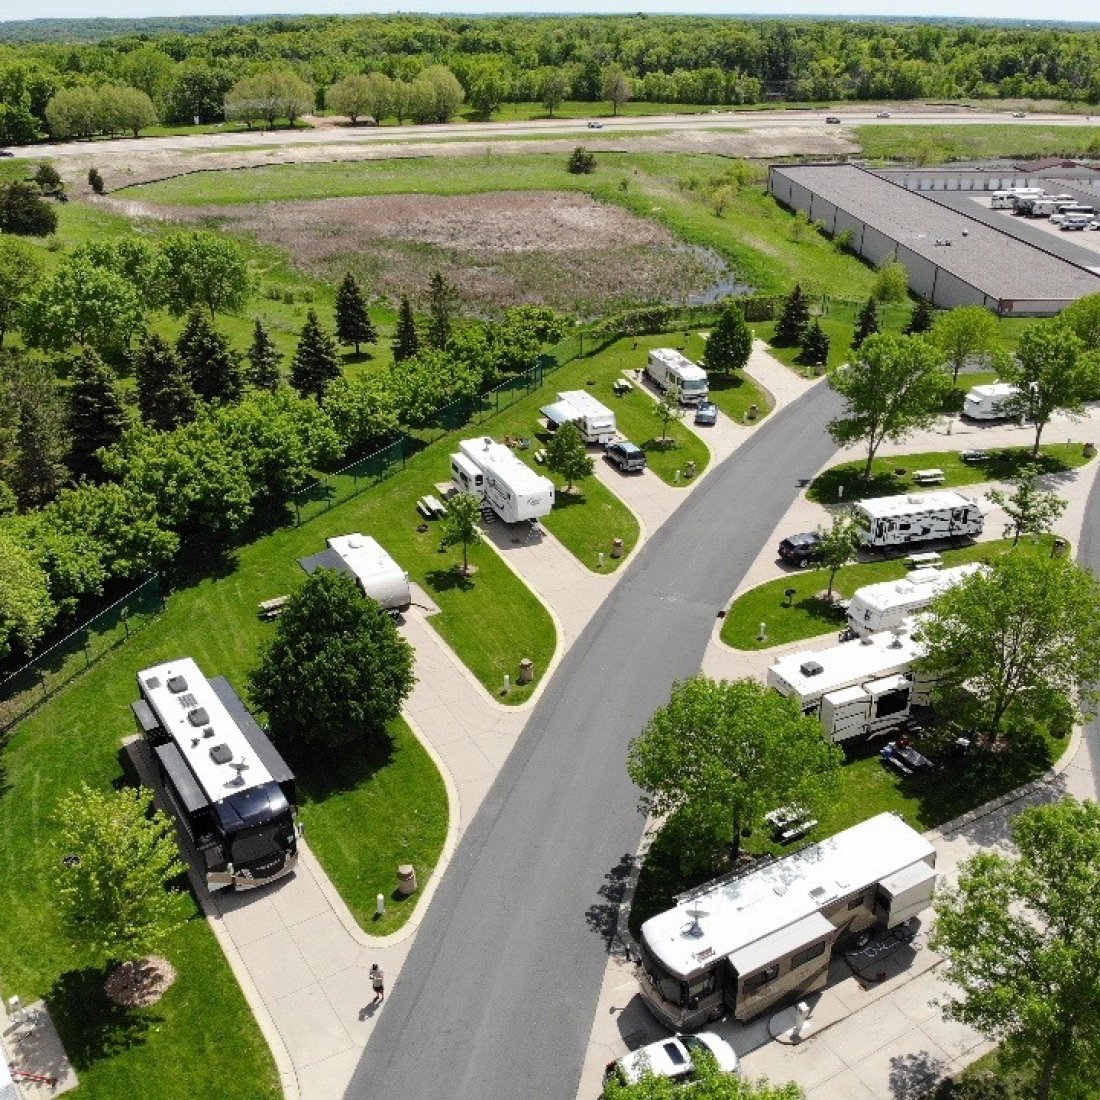 Aerial view of RV park with green grass